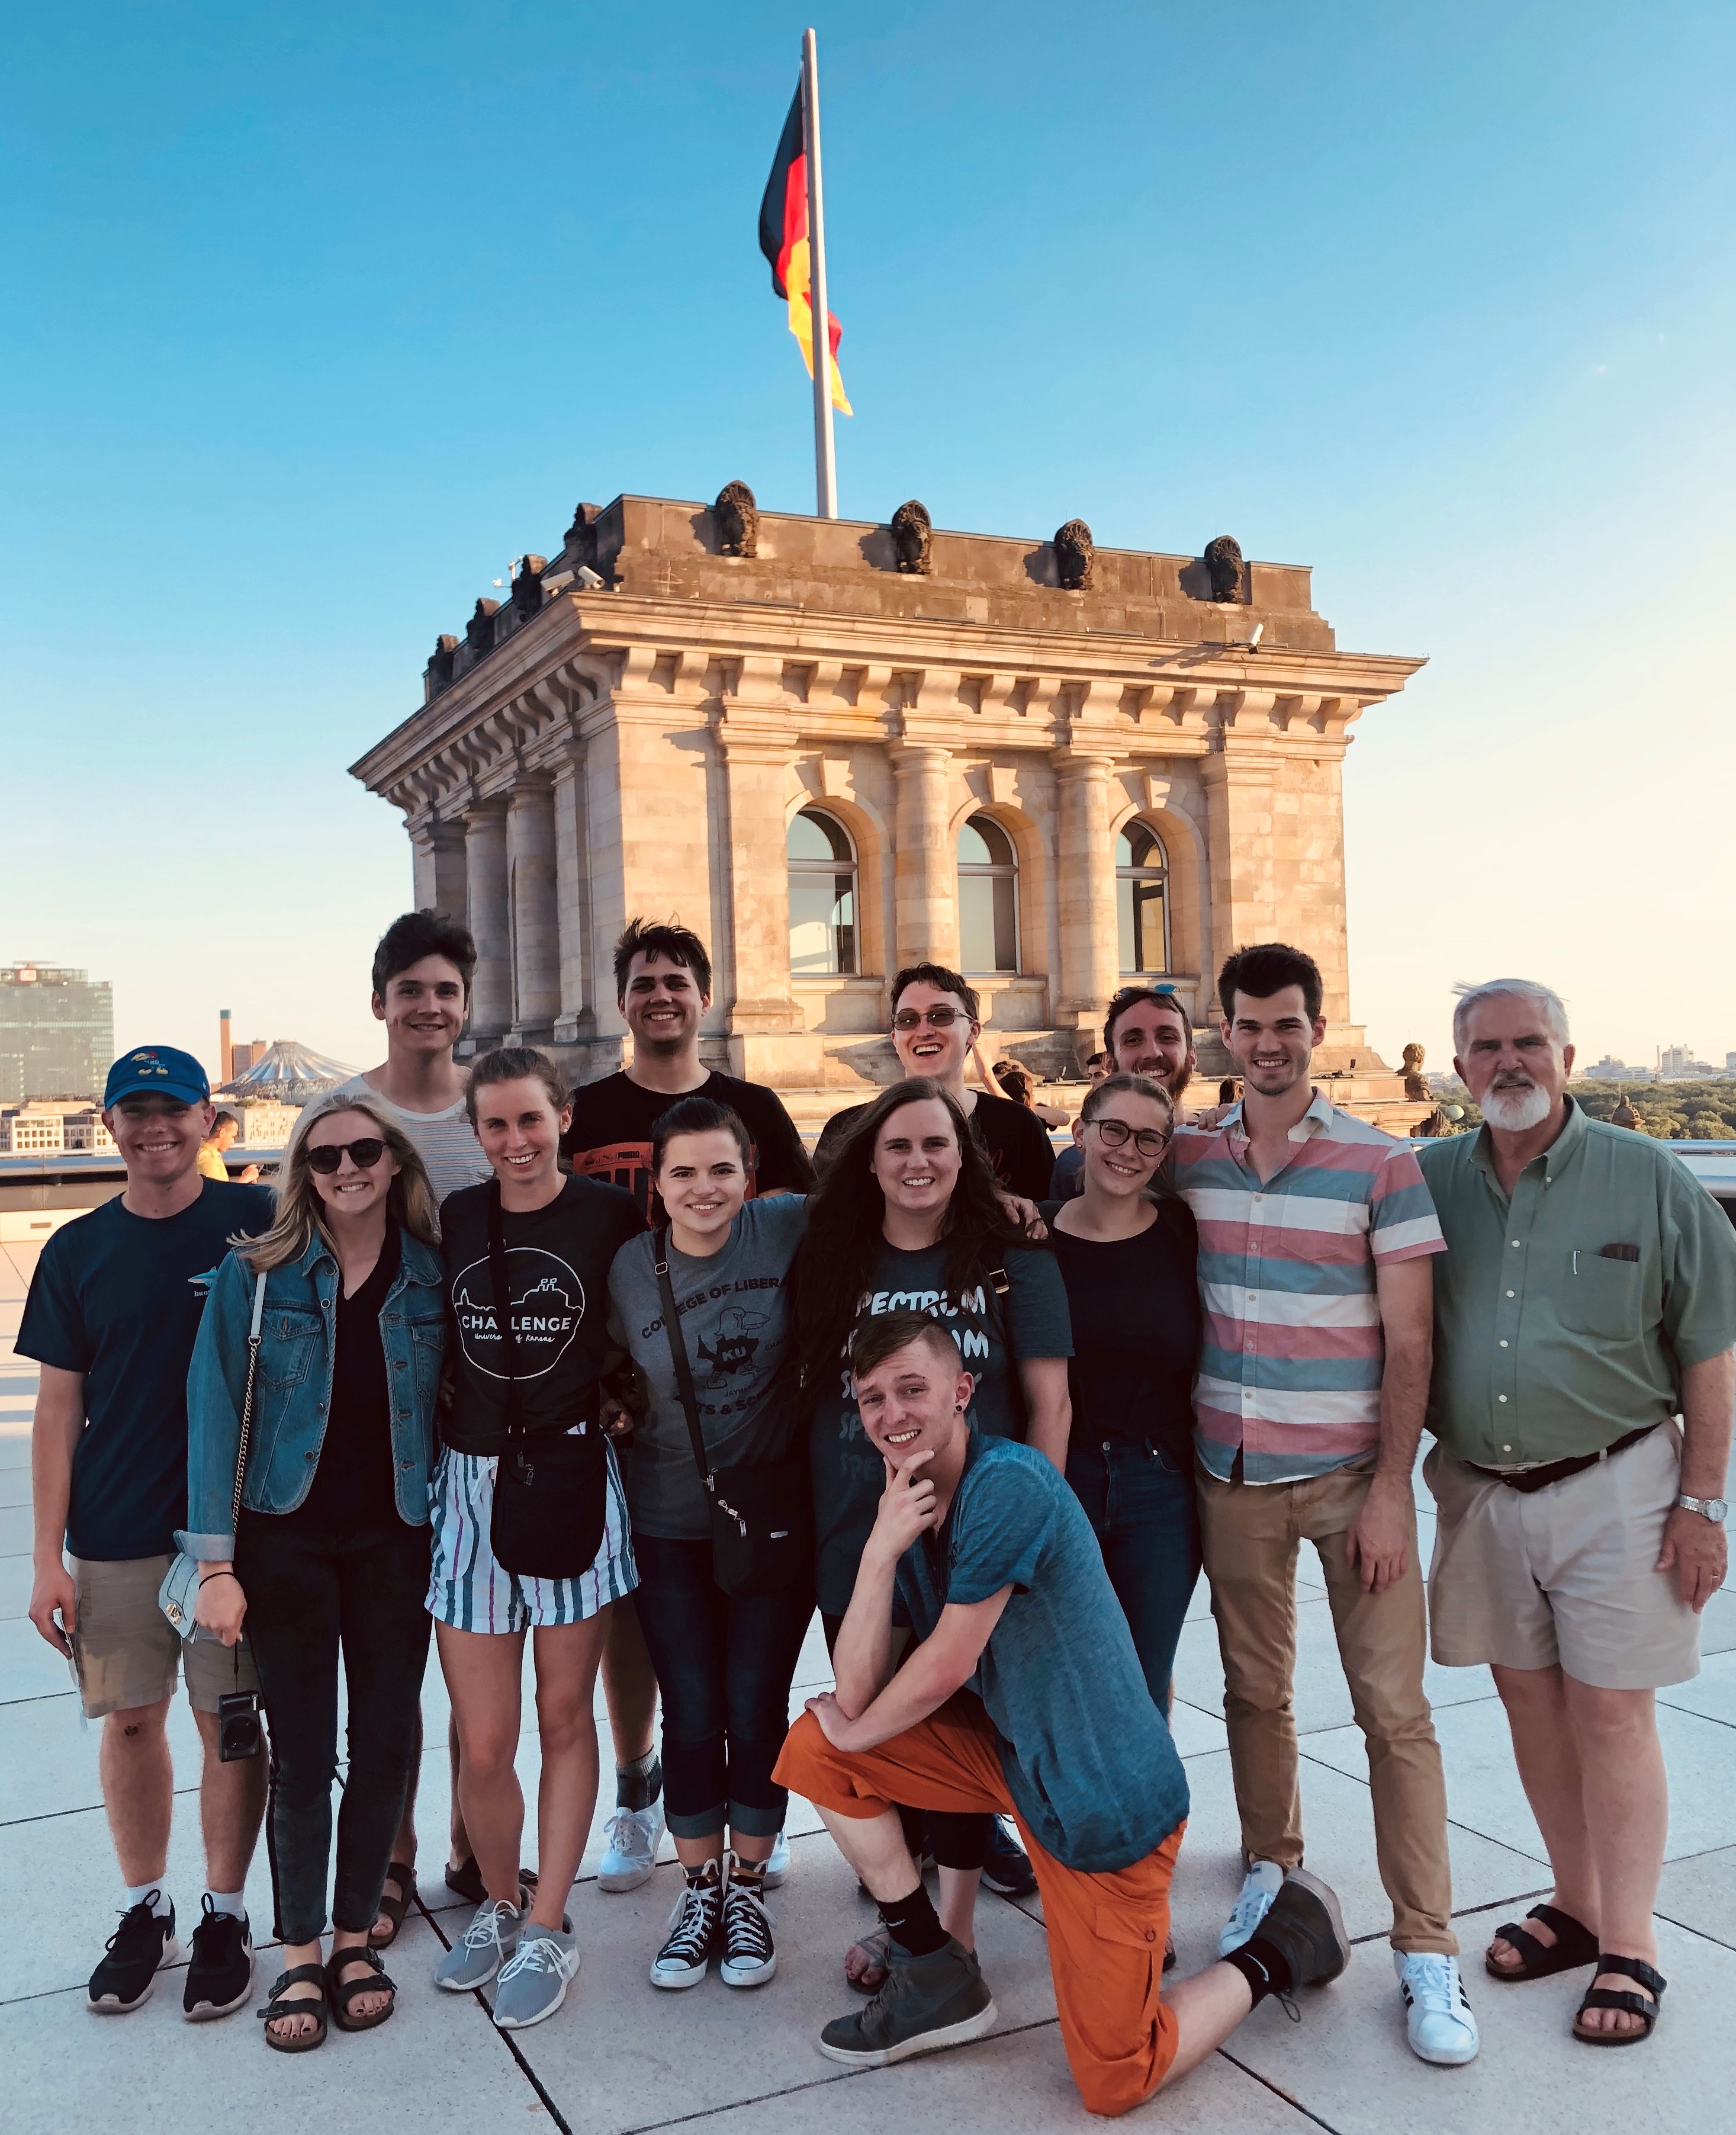 students and advisors stand together in Bundestag Berlin